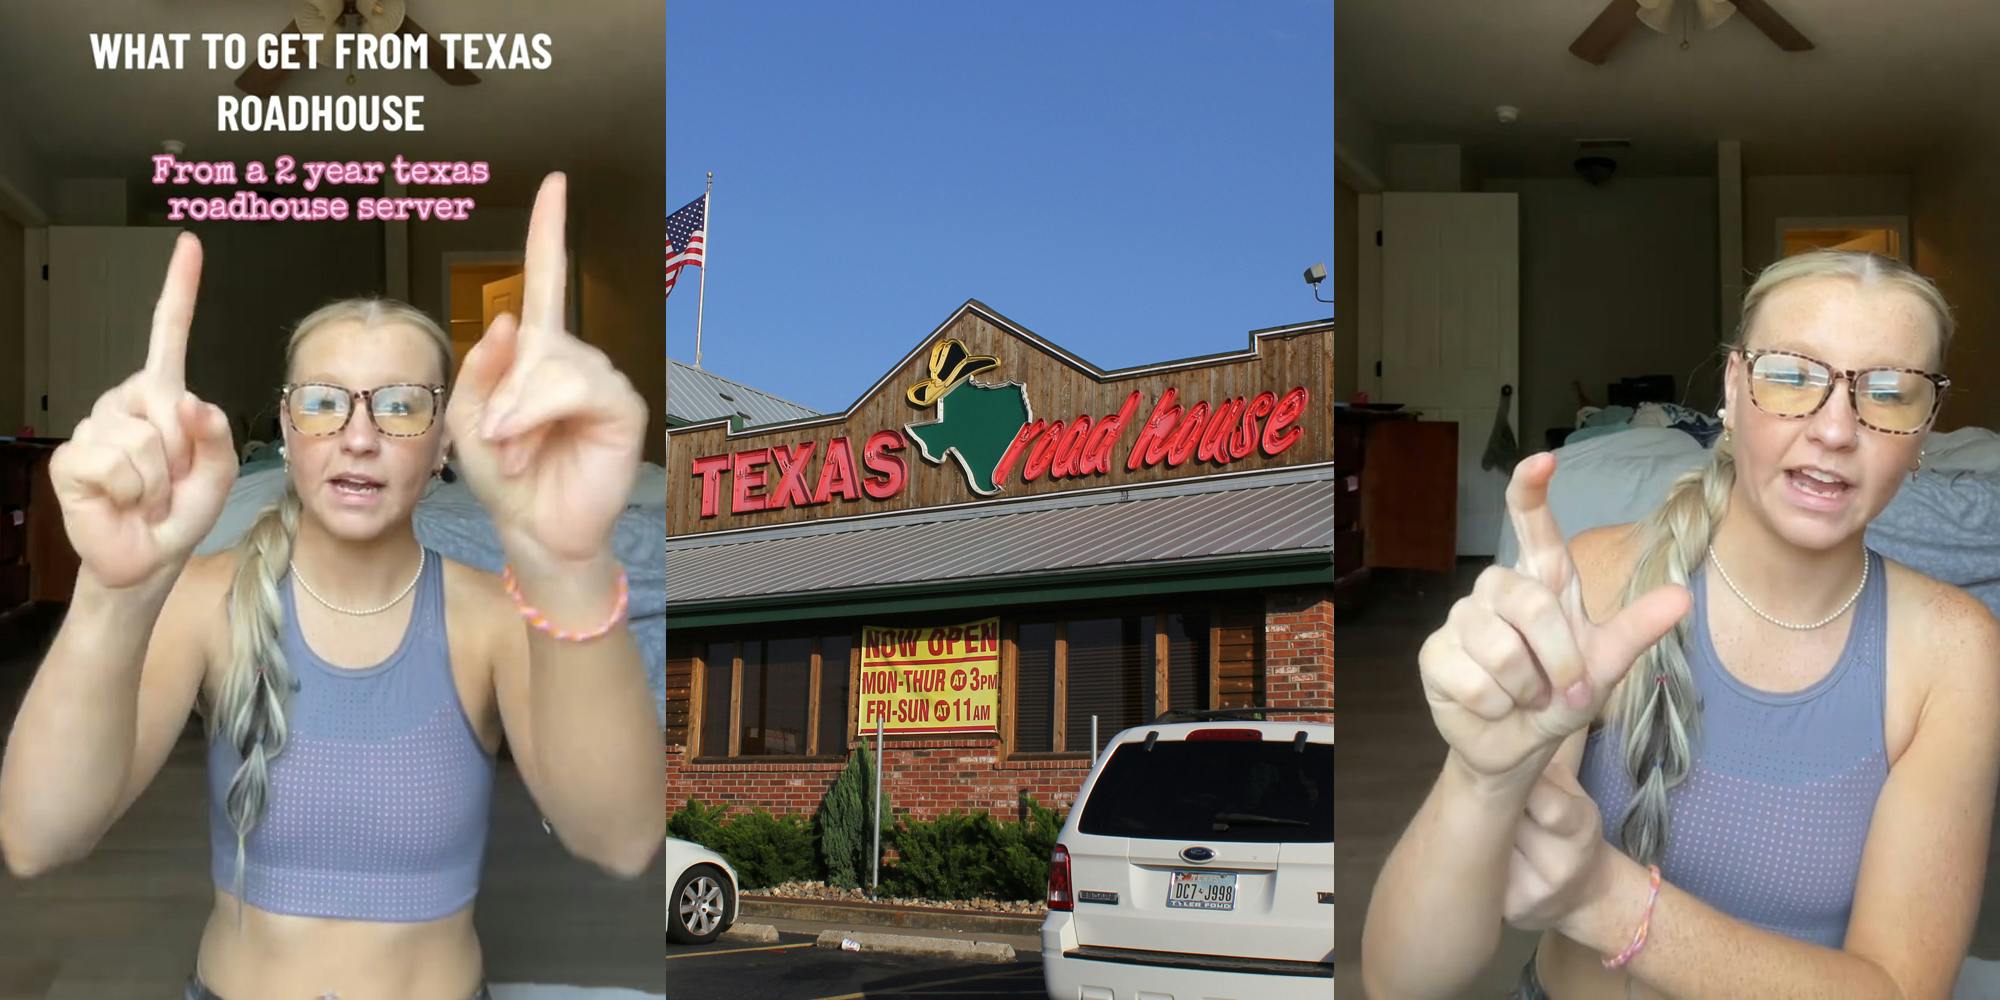 Texas Roadhouse server speaking with caption "WHAT TO GET FROM TEXAS ROADHOUSE From a 2 year texas roadhouse server" (l) Texas Roadhouse building with sign (c) Texas Roadhouse server speaking (r)